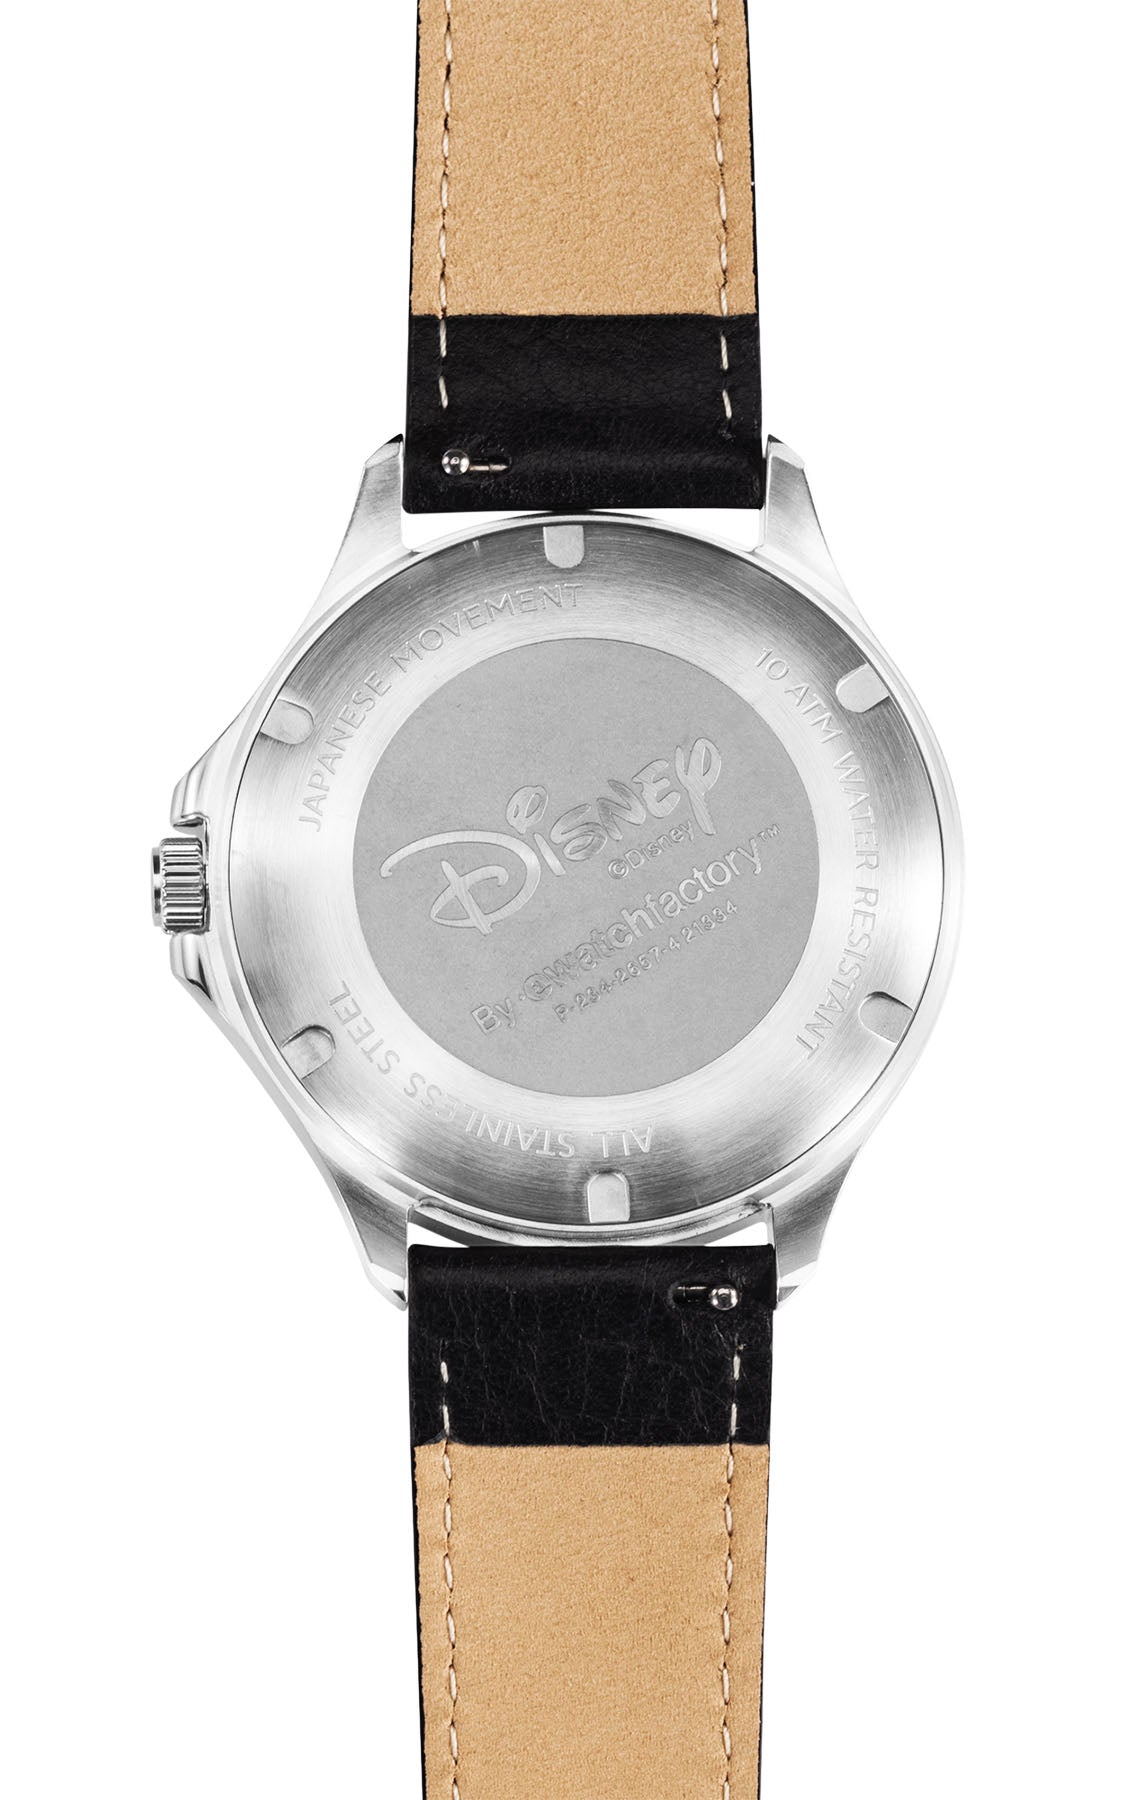 Disney Mickey Mouse Black Leather